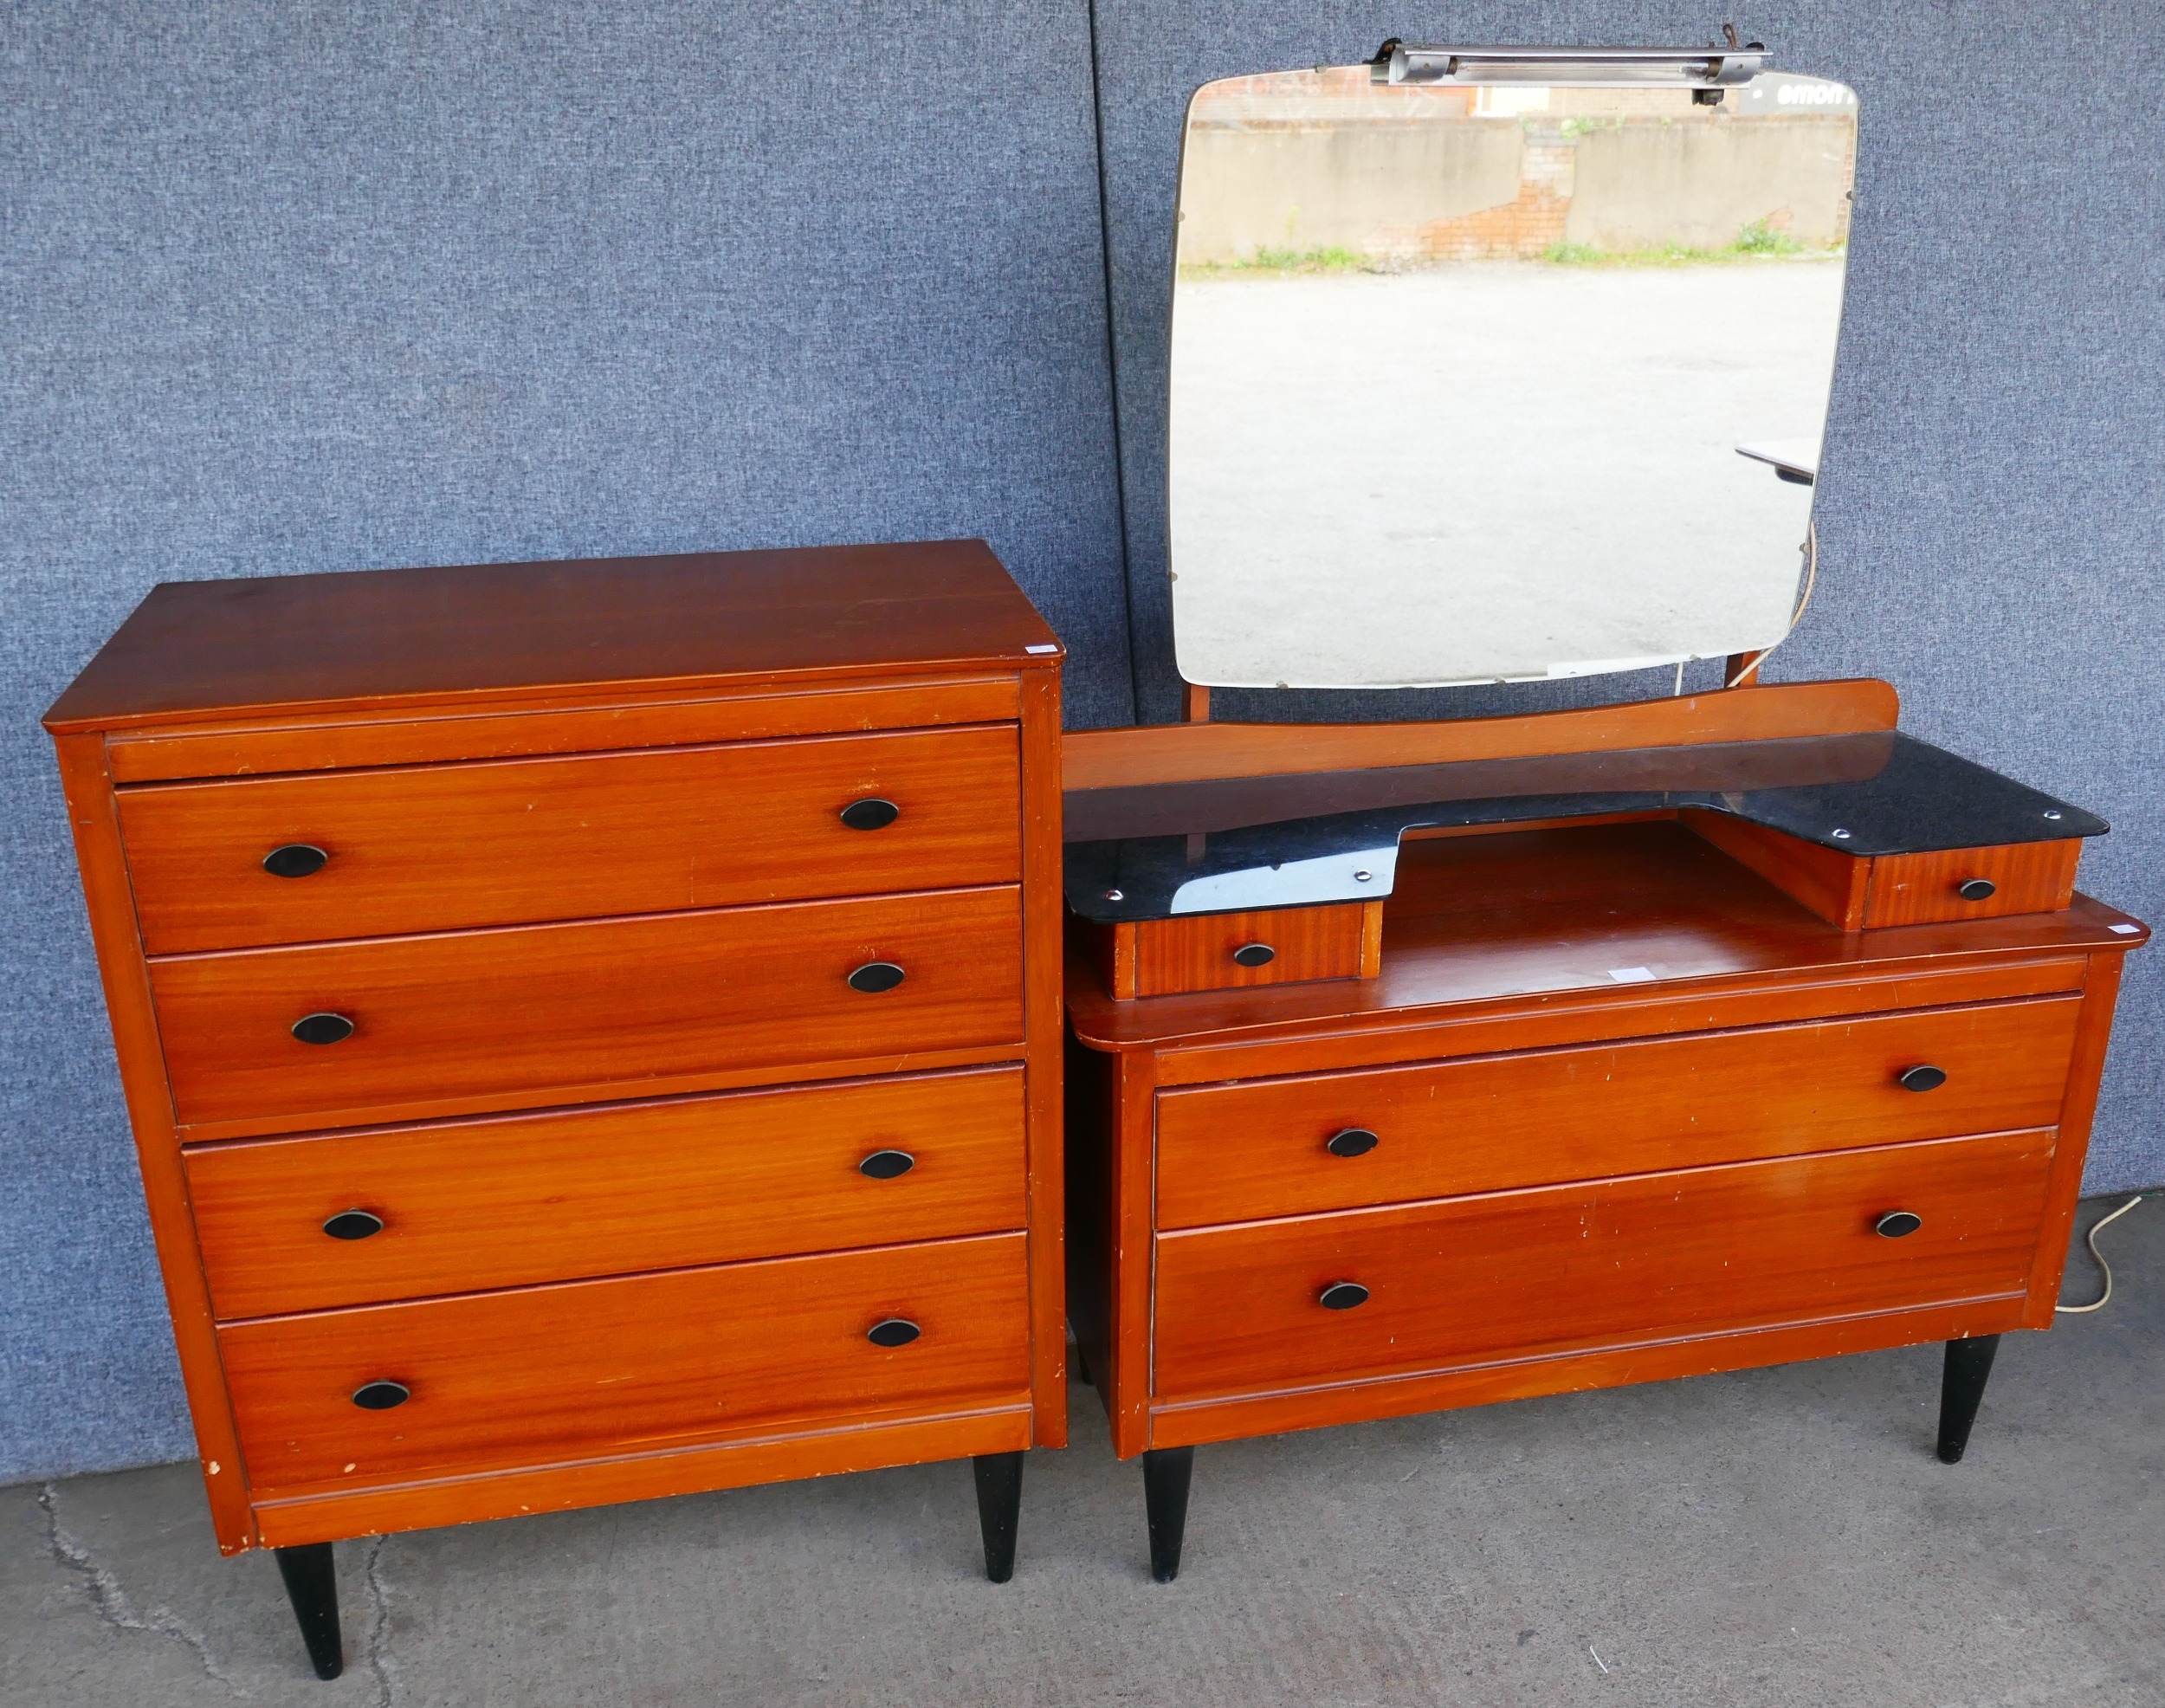 A Lebus teak chest of drawers and dressing table